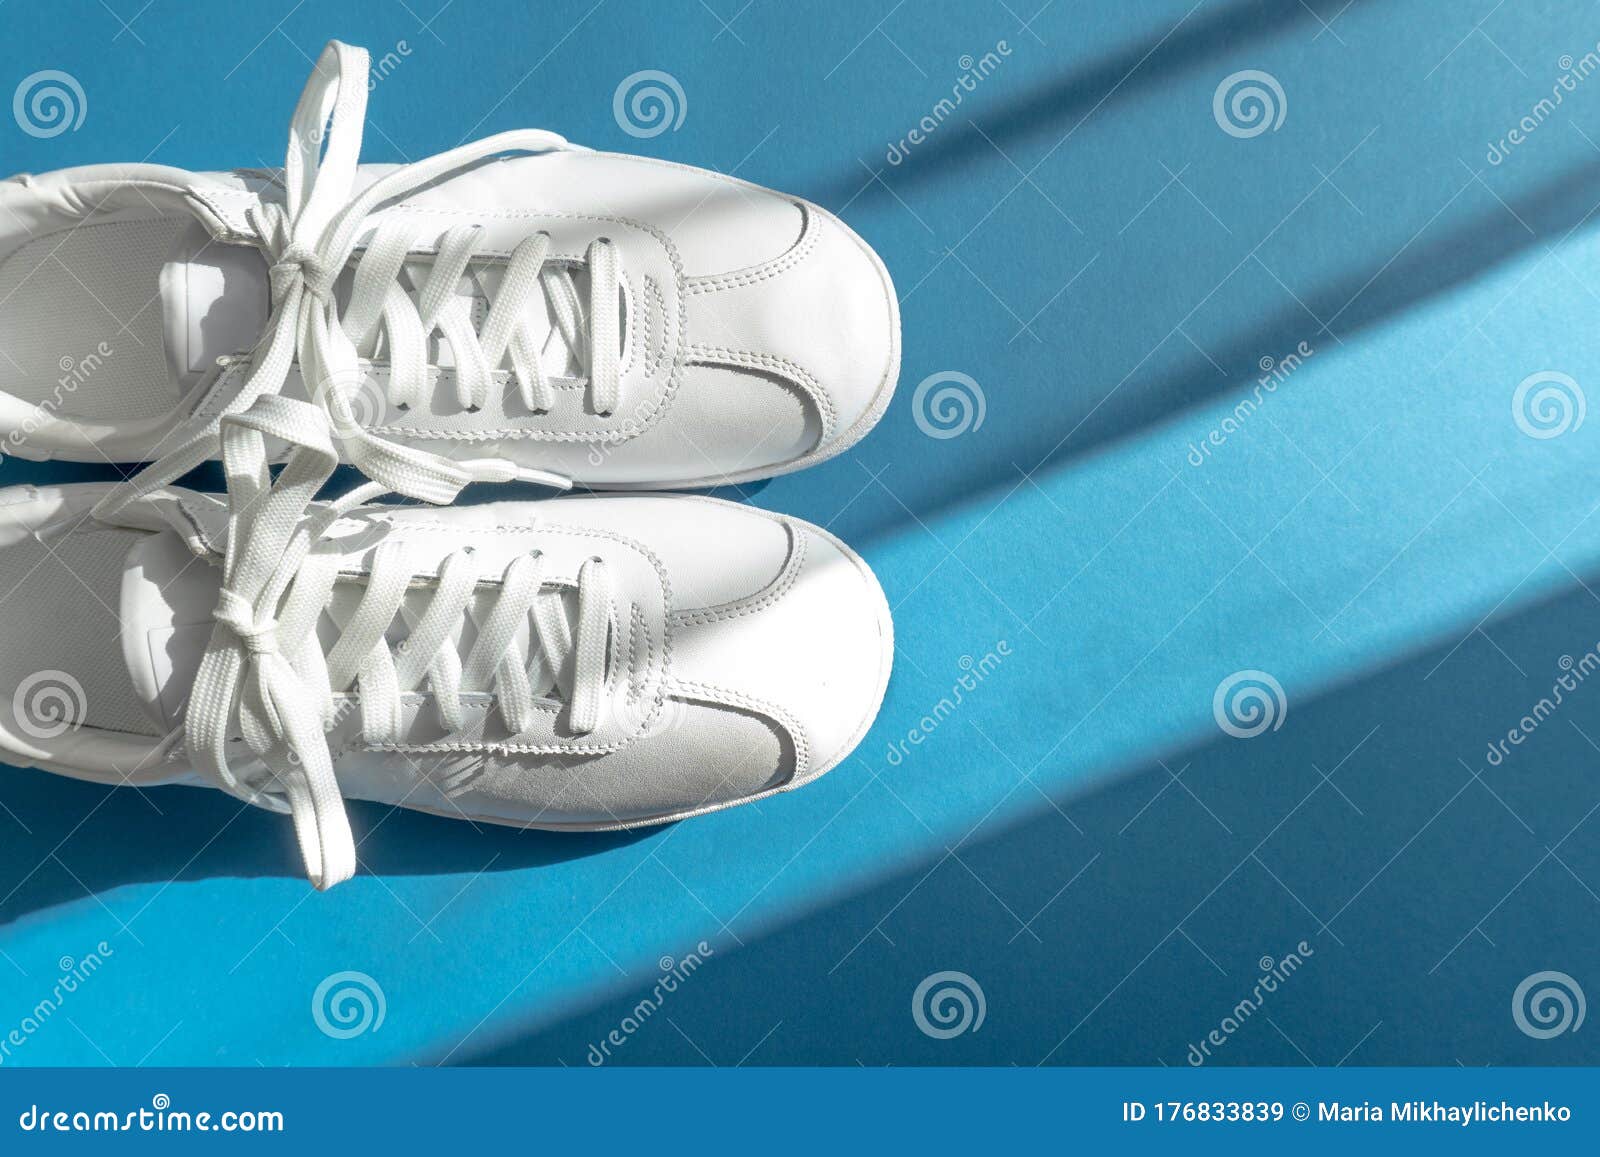 White Unisex Shoes Sneakers on Classic Blue Background Stock Image ...